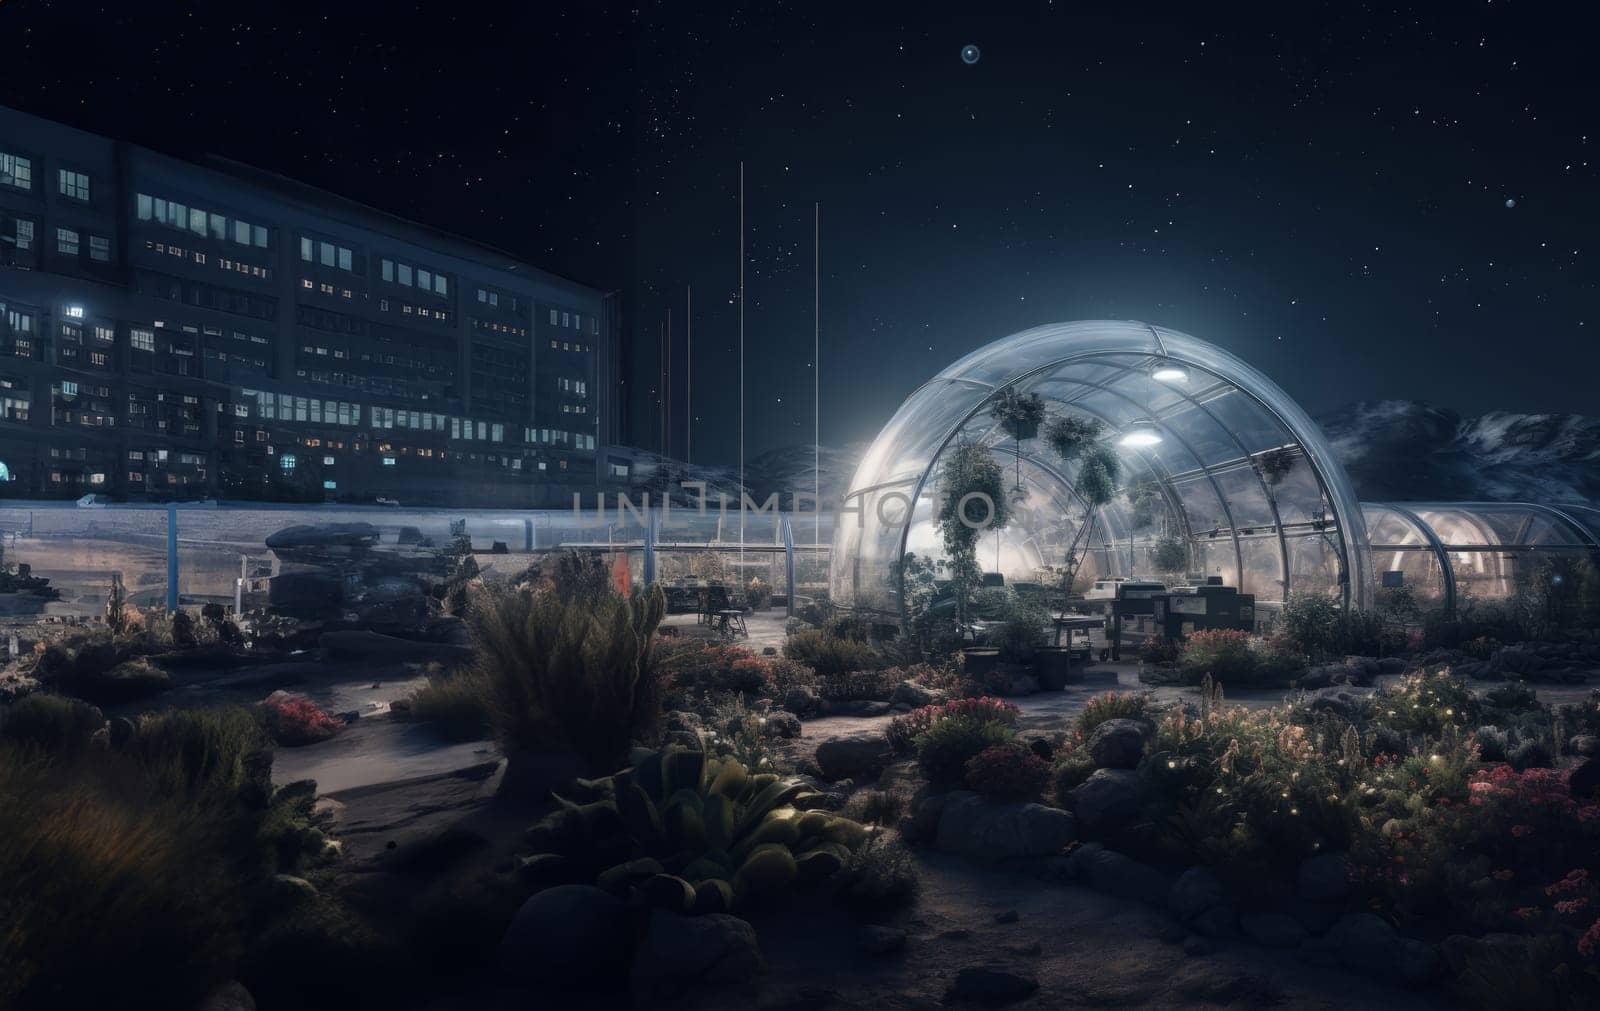 Earth Plants Thrive in Lunar Greenhouse.Generated image by dotshock